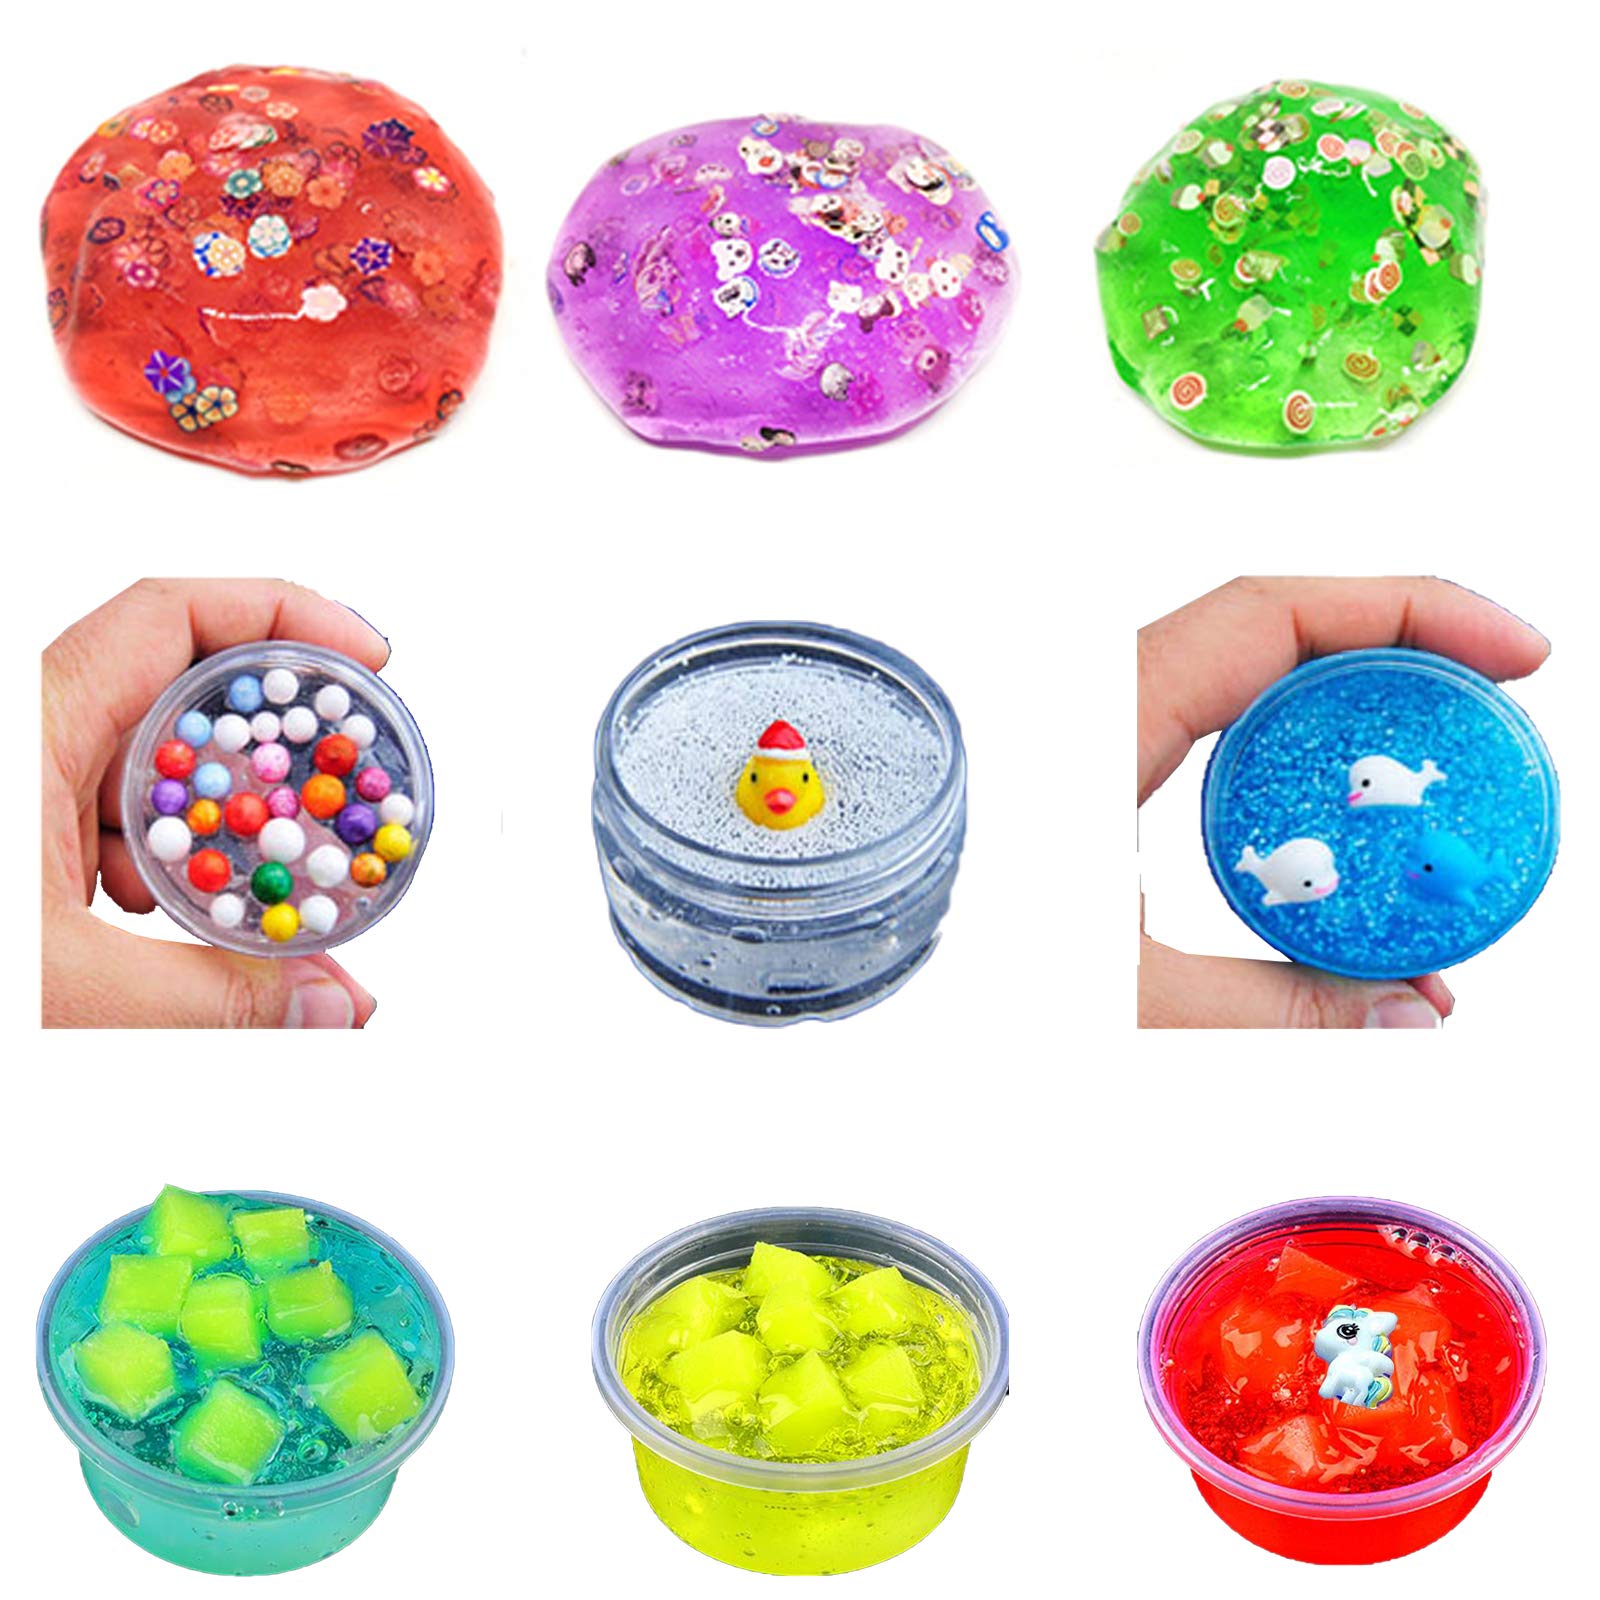 Slime Kit,Slime 24 and Clay 6 DIY Slime Kit for Girls Boys Kids,108Pcs Big Slime Making Kit Clear Slime,48 Glitters,Slime Supplies for Party Favors,Kids Gift Ages 3+